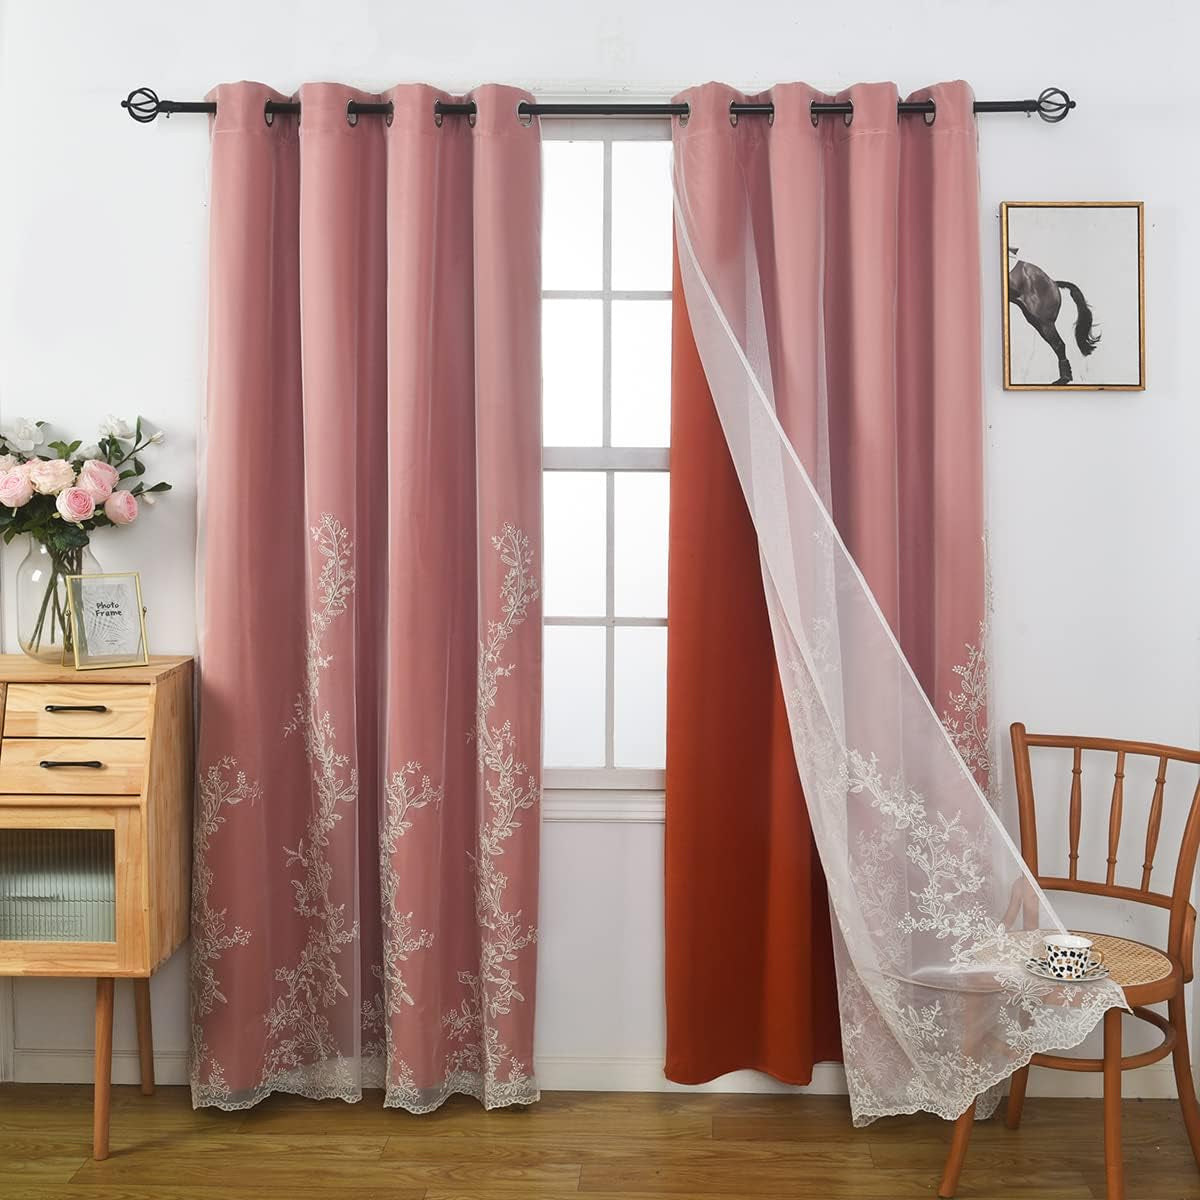 GYROHOME Double Layered Curtains with Embroidered White Sheer Tulle, Mix and Match Curtains Room Darkening Grommet Top Thermal Insulated Drapes,2Panels,52X84Inch,Beige  GYROHOME Tangerine 52Wx63Lx2 